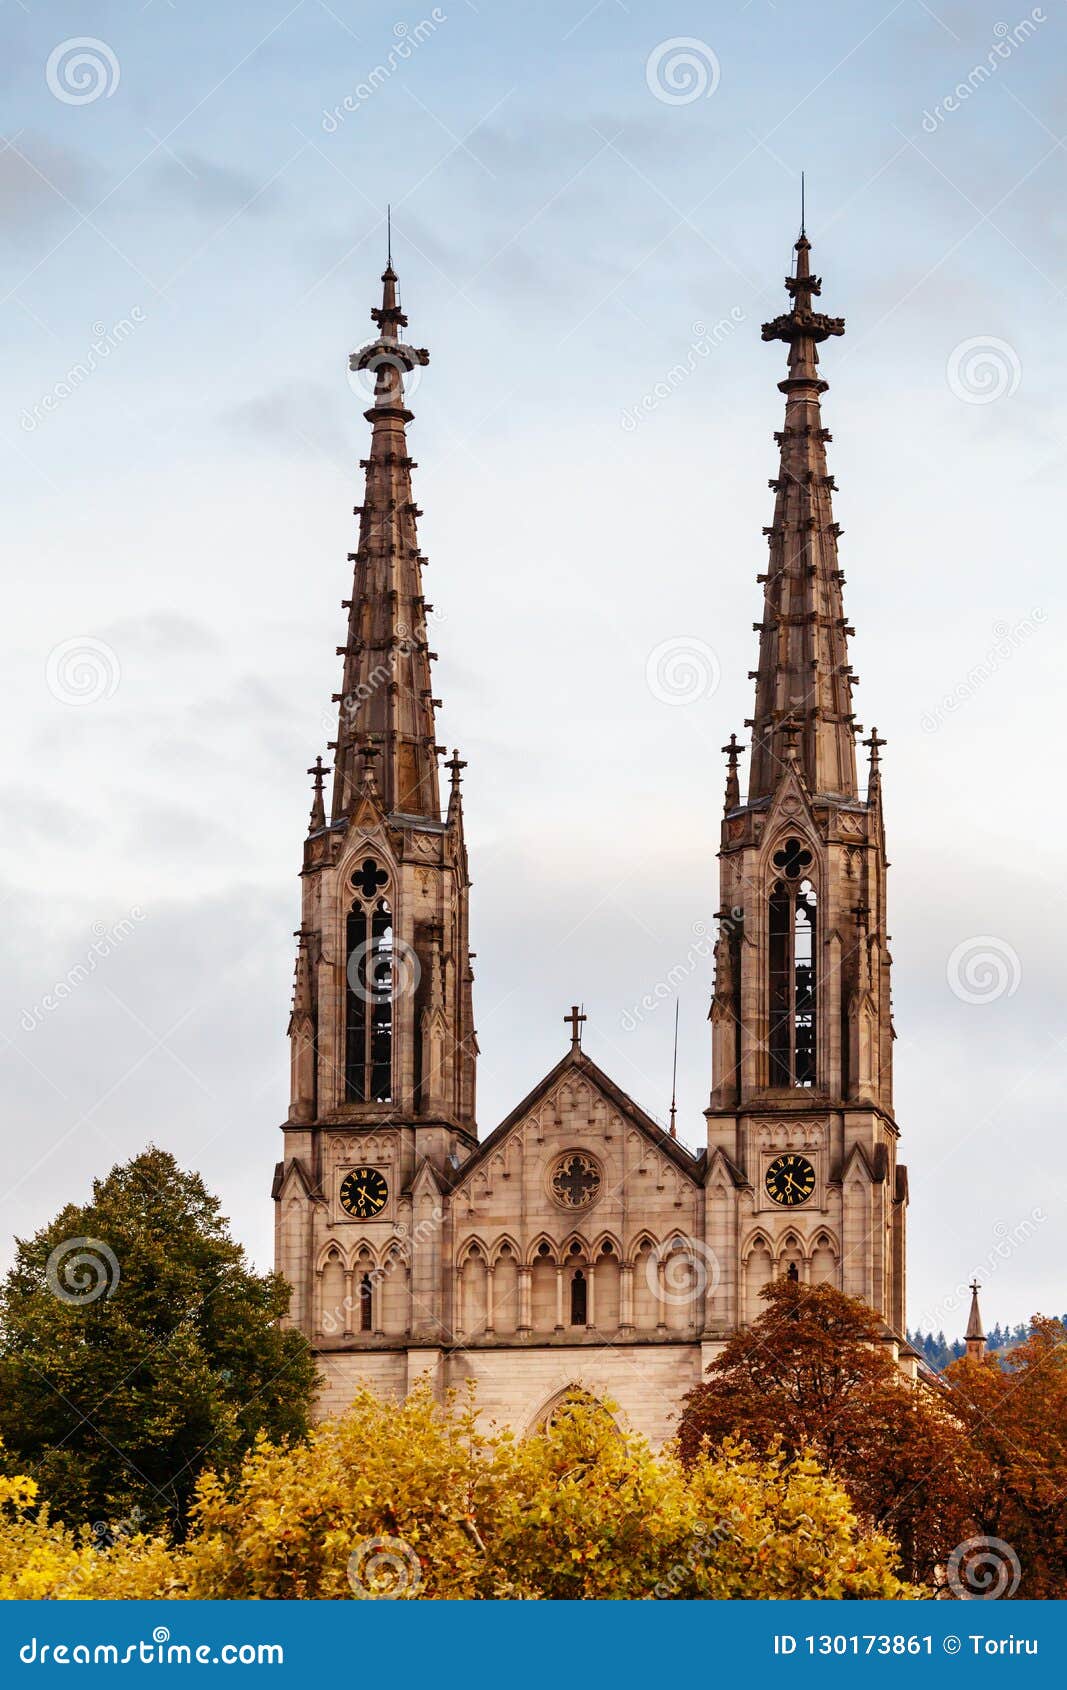 cathedral in baden-baden